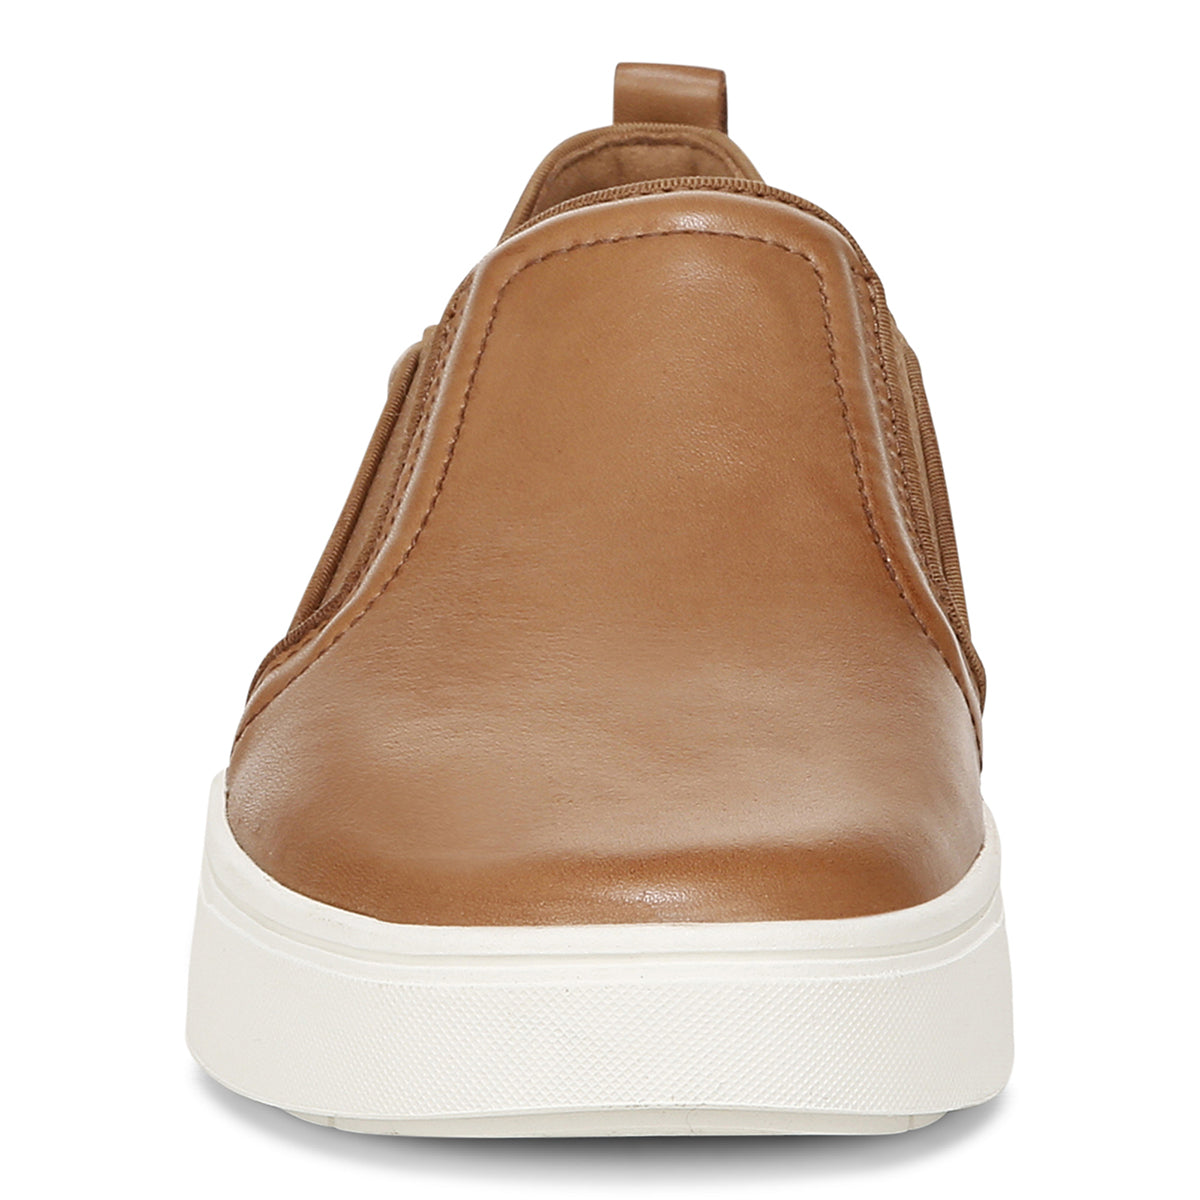 TAN LEATHER | Front